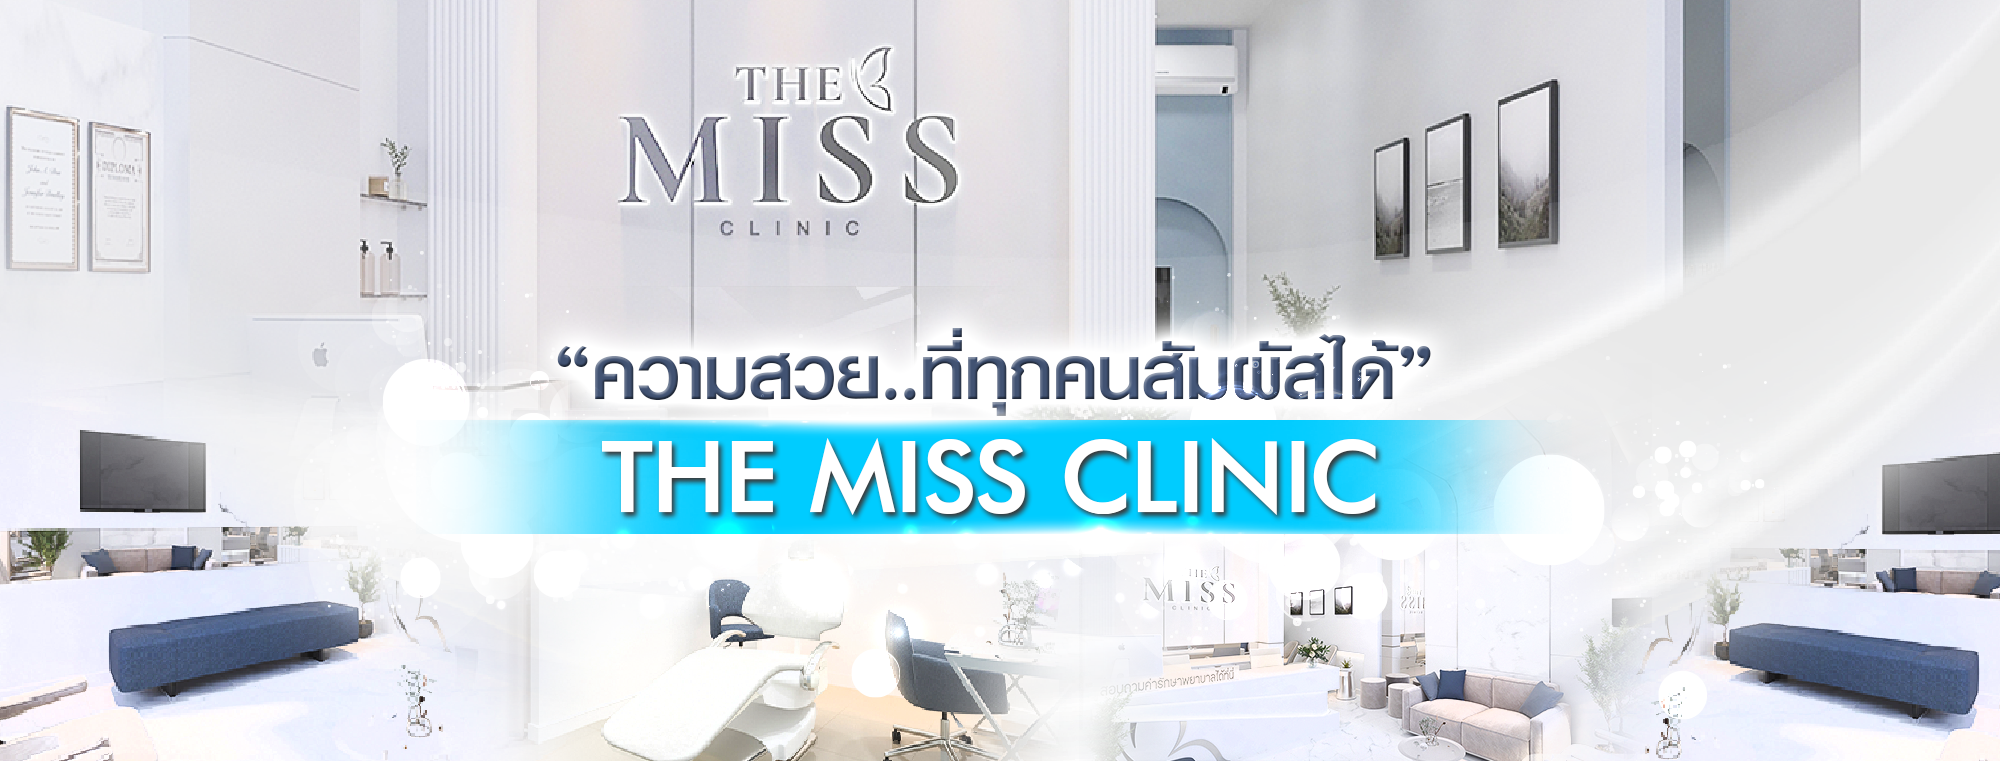 the miss clinic